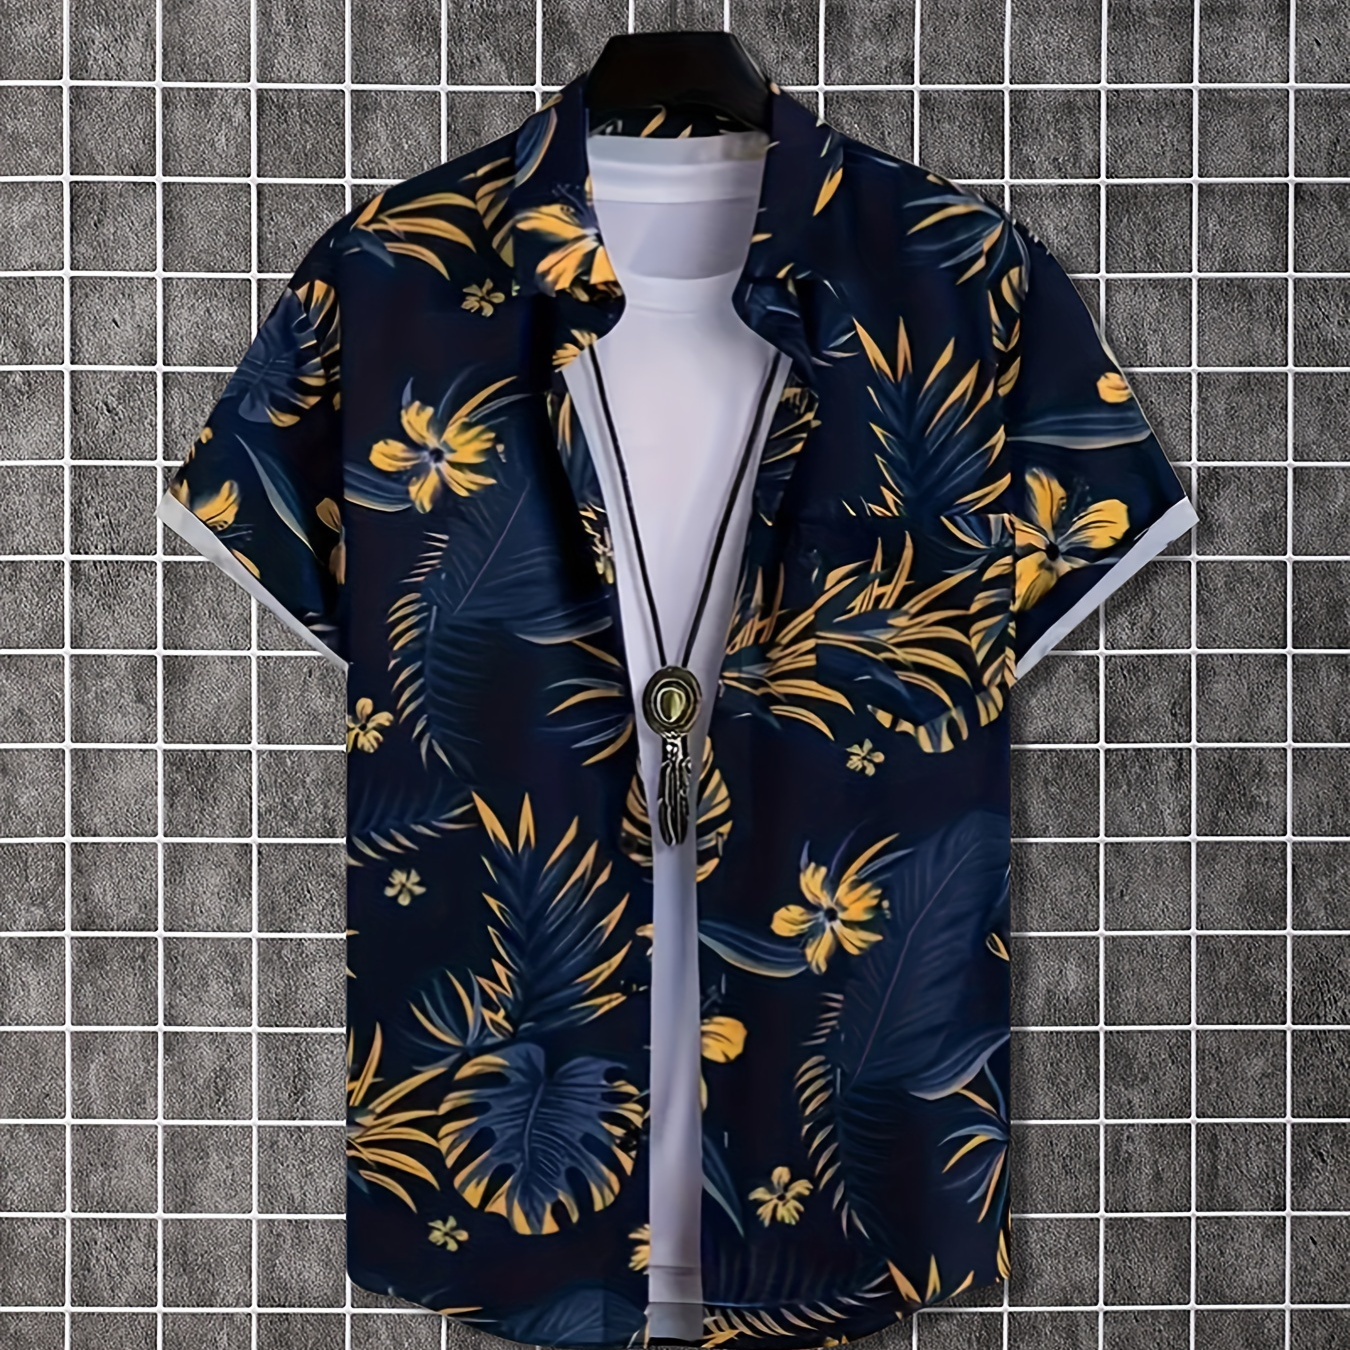 

Men's Short Sleeve Button-up Shirt With Fancy Print, Casual Summer Hawaiian Style, Daily Vacation Beachwear For Men